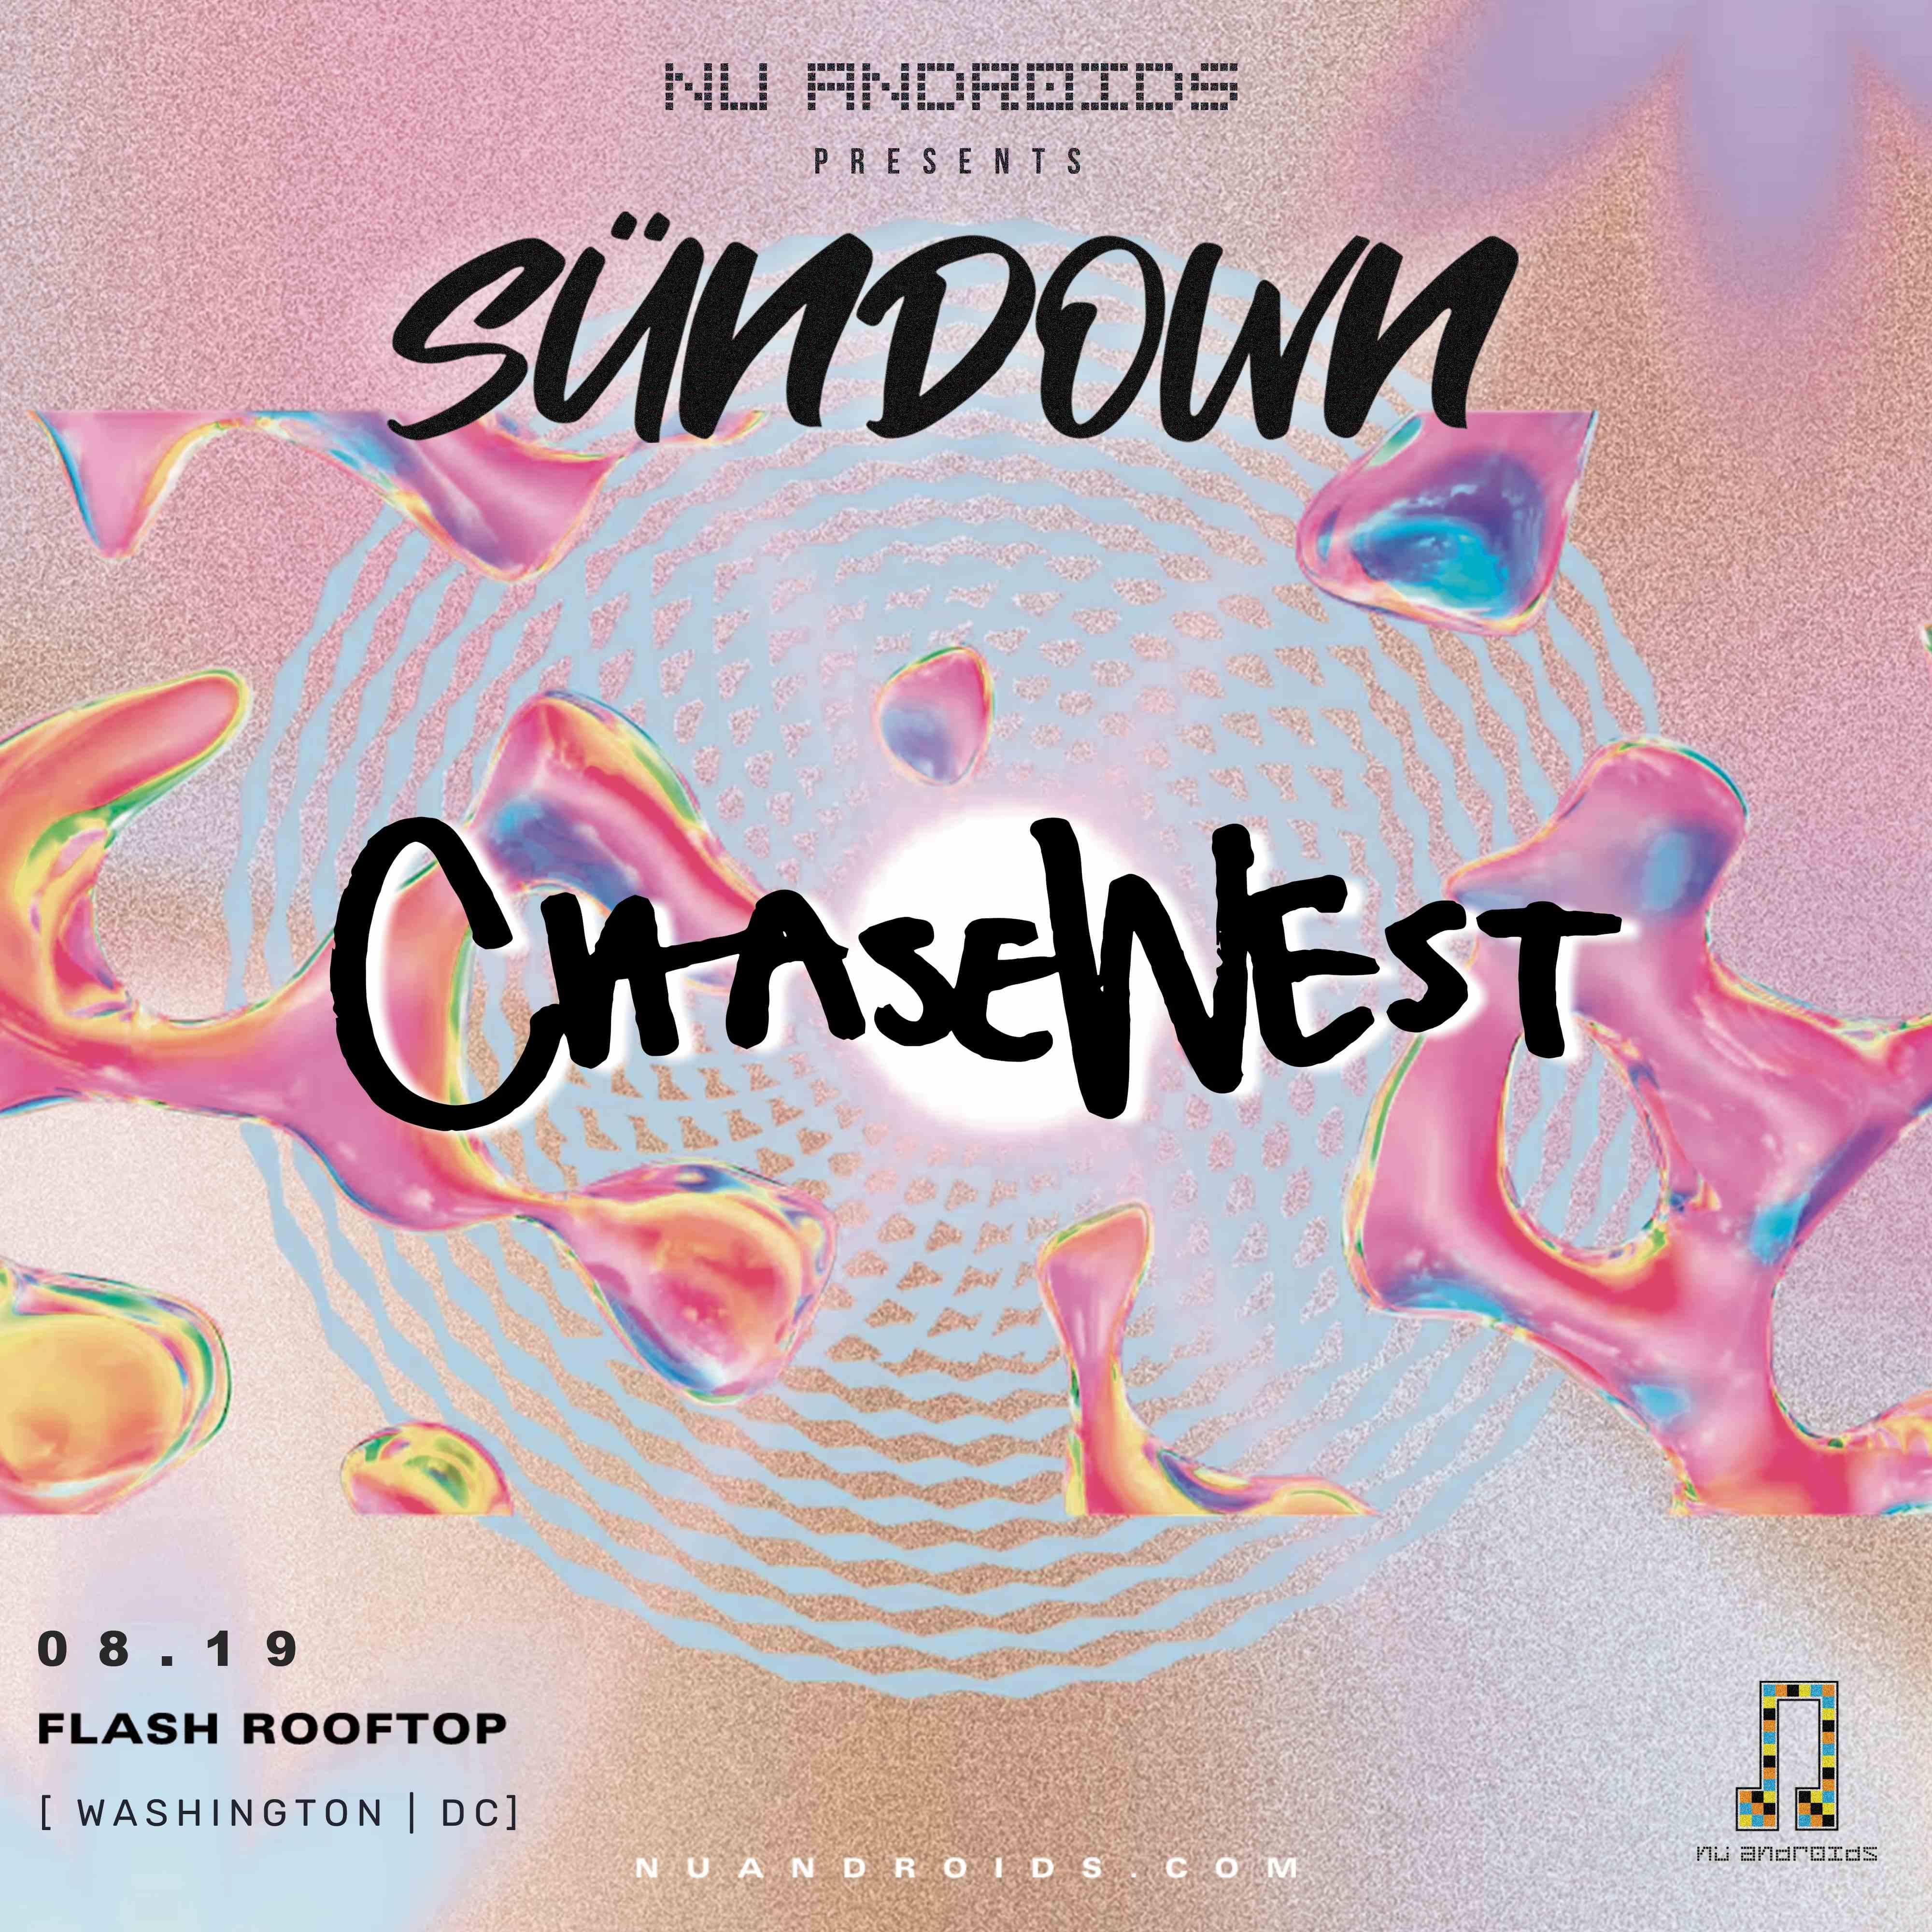 Nü Androids presents SünDown: ChaseWest (21+) event flyer